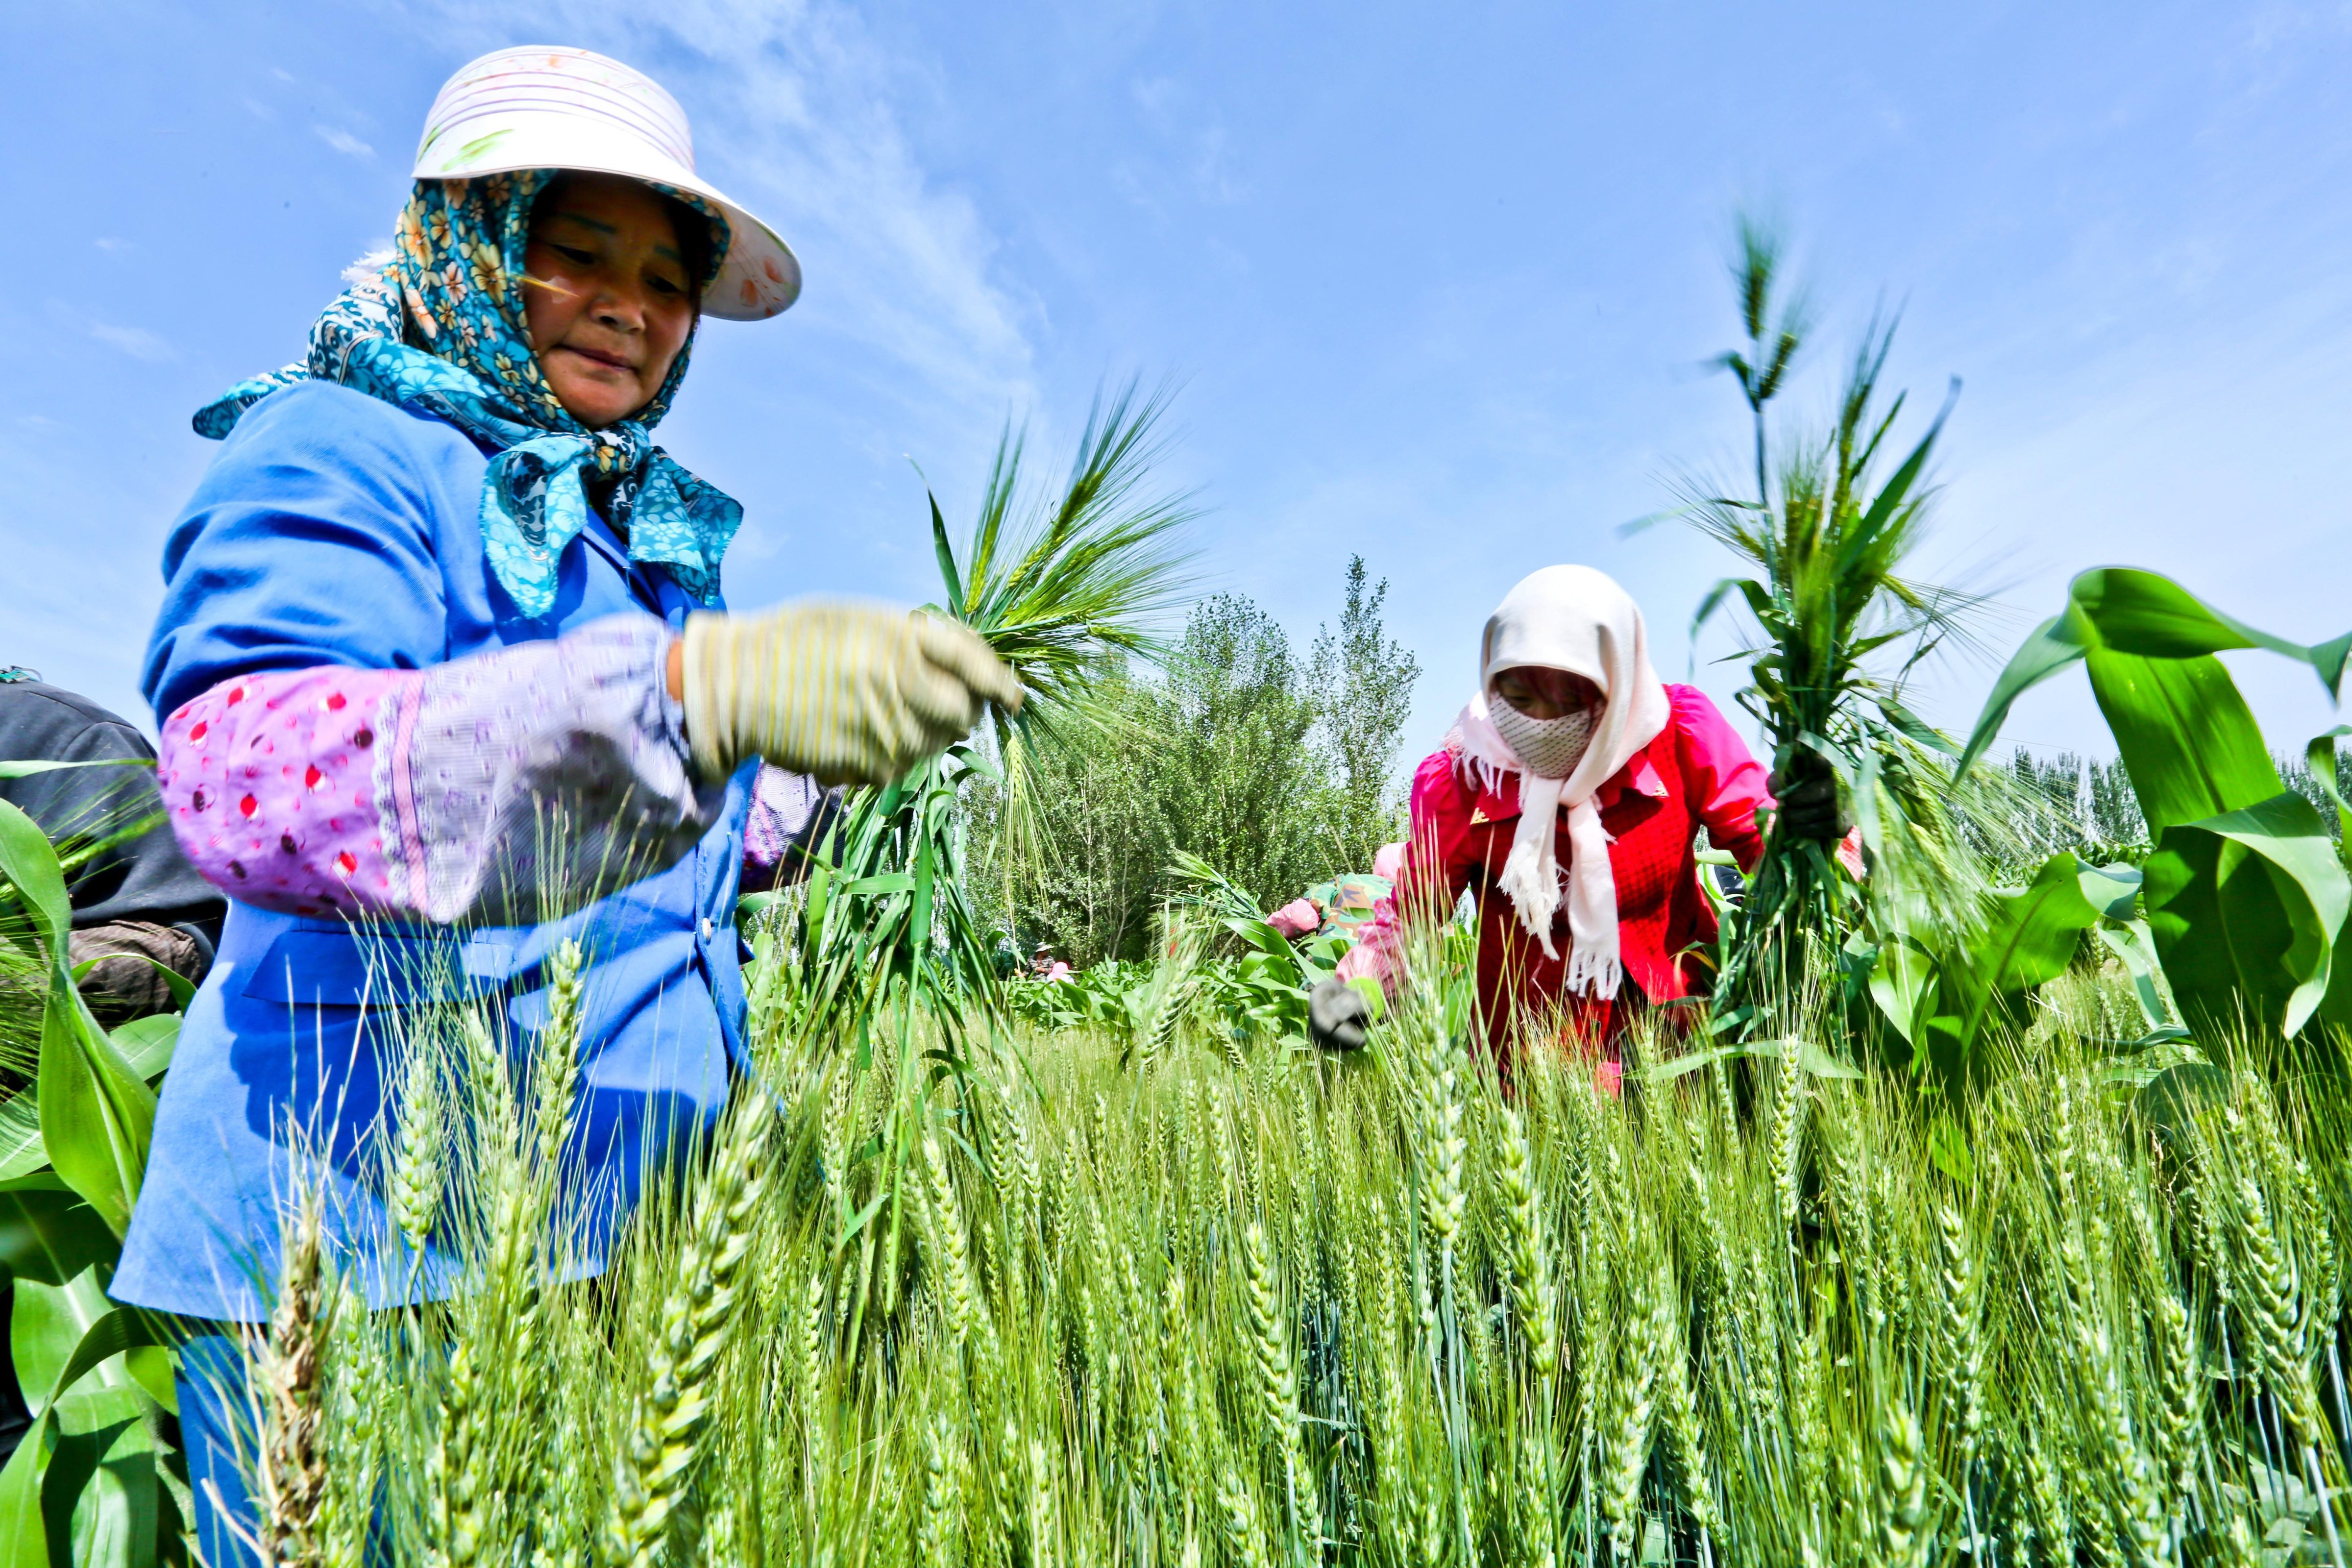 Villagers work on their farmlands in Ganzhou district of Zhangye City, northwest China's Gansu province, on June 22, 2015 (Xinhua News Agency/Getty Images)